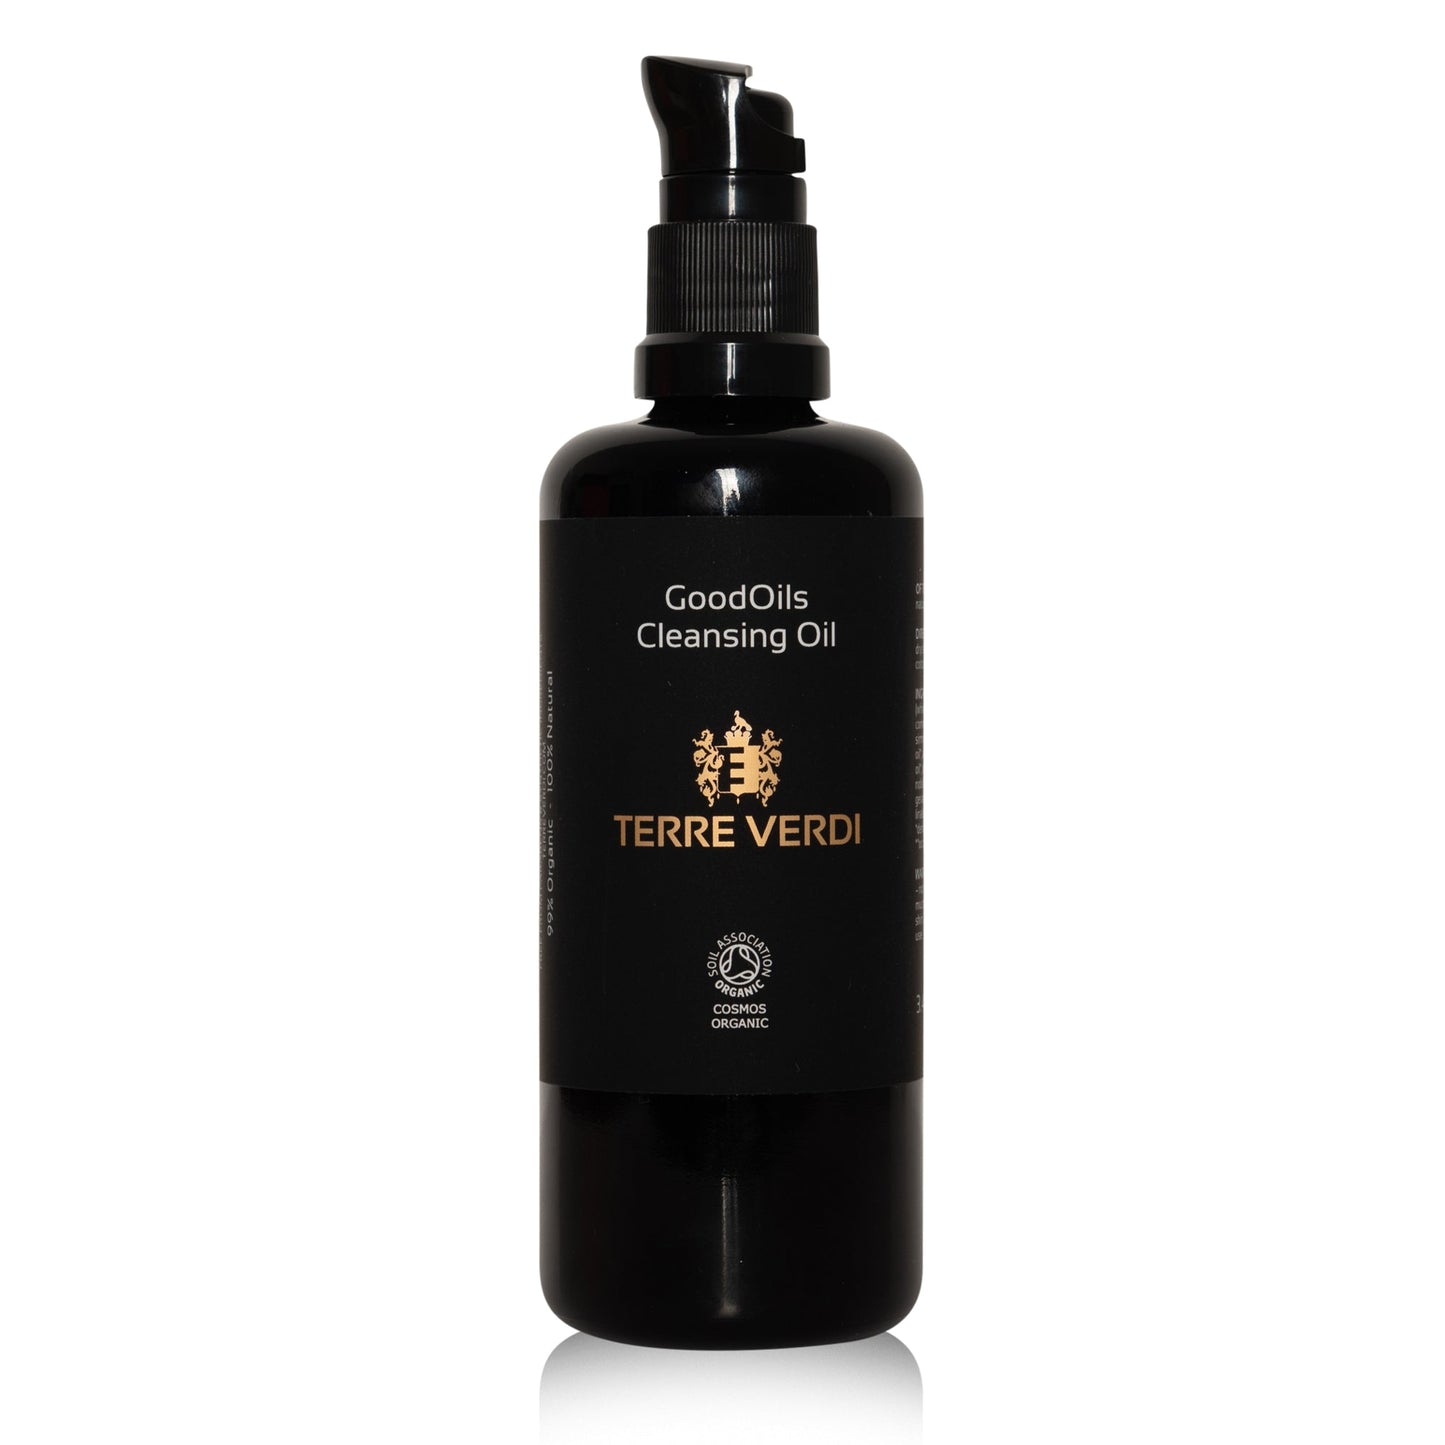 GoodOils Cleansing Oil - Organic Face Cleanser